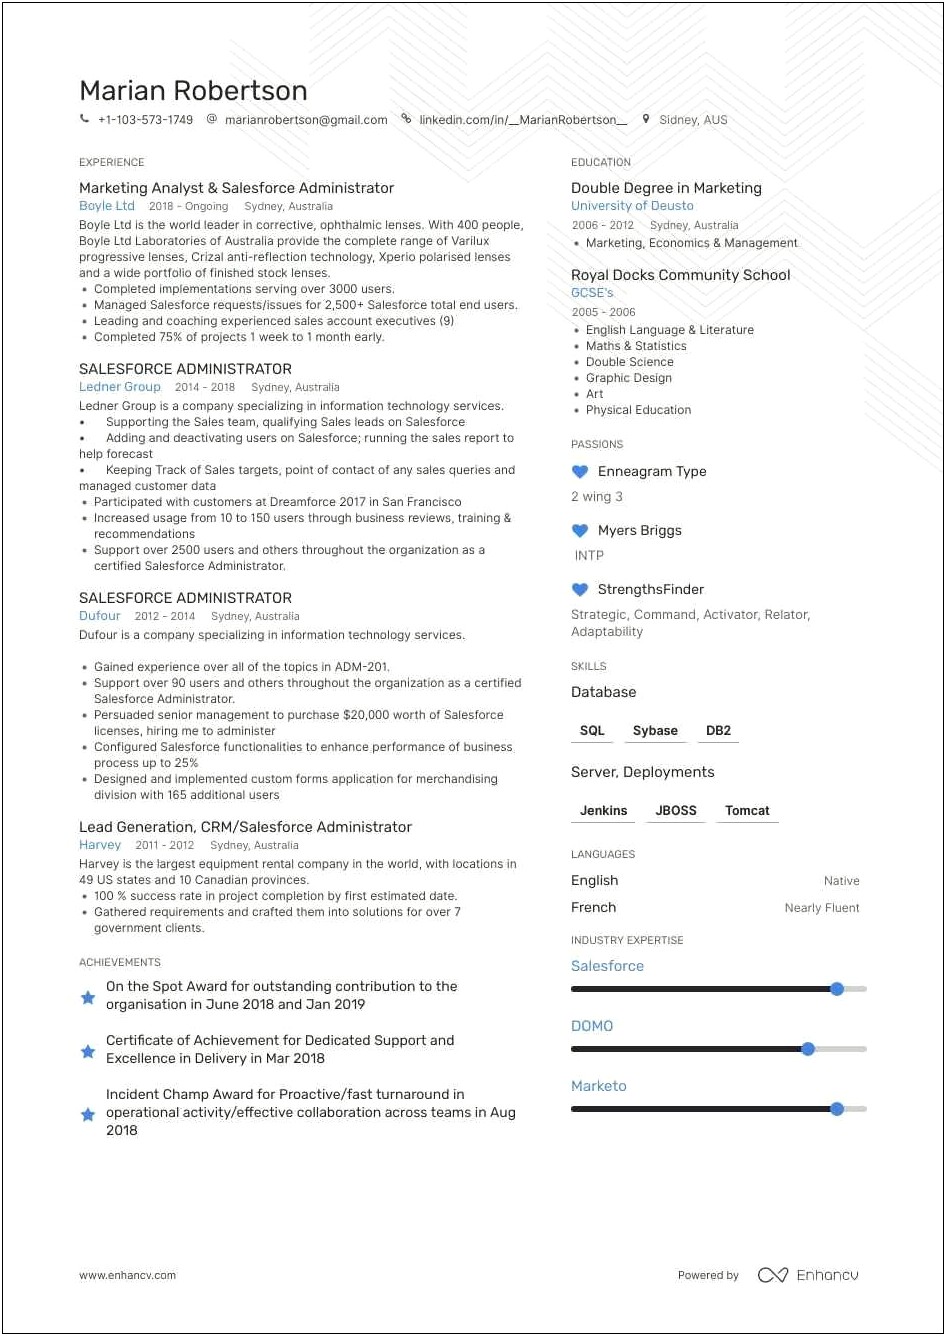 Dsalesforce Developer Resume With Visual Force Experience